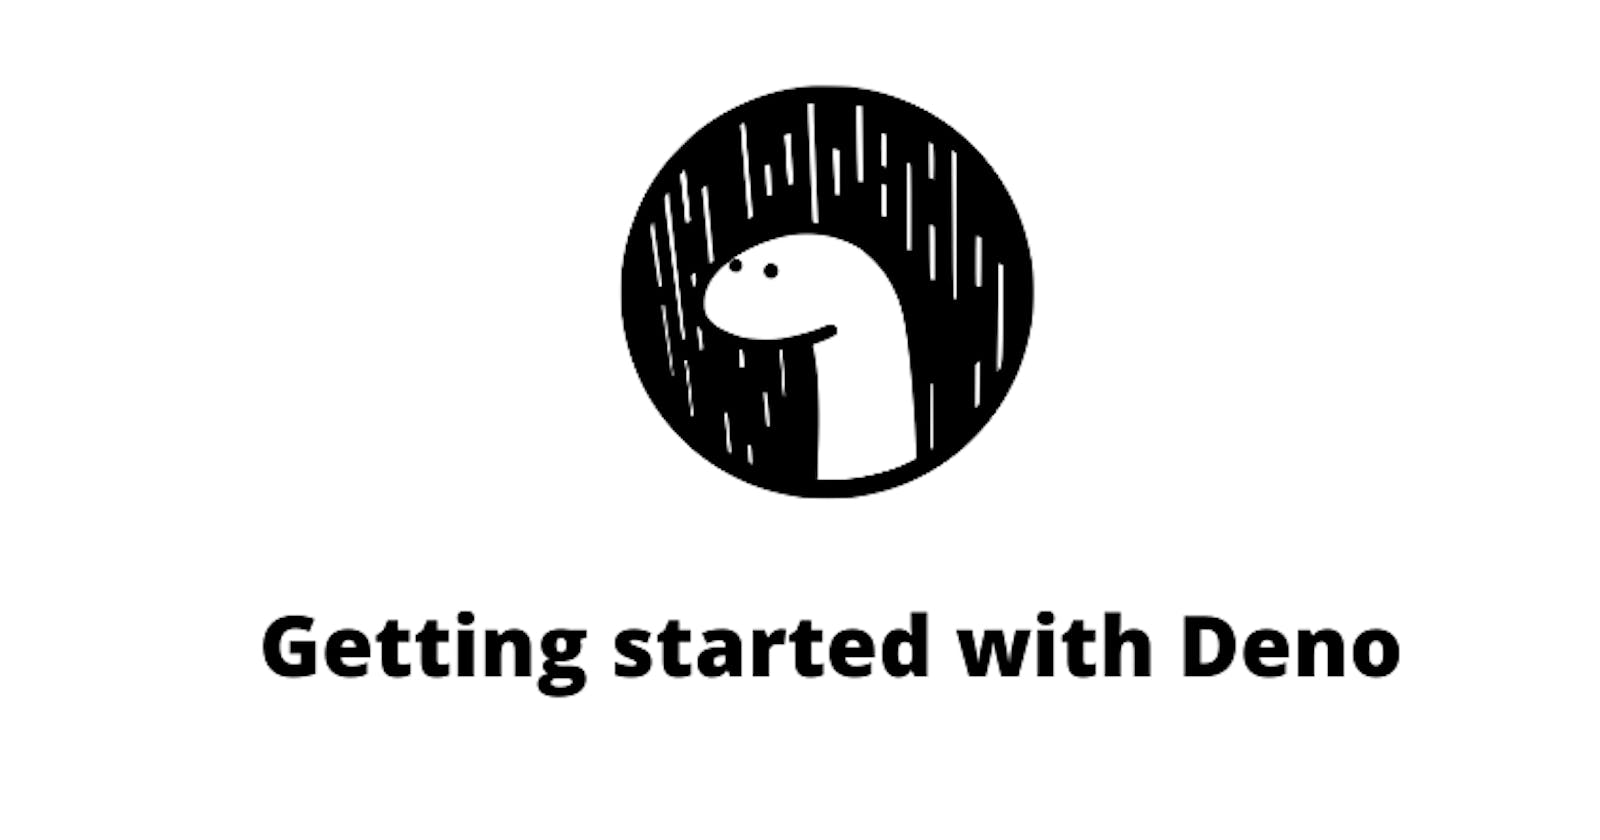 Getting started with Deno